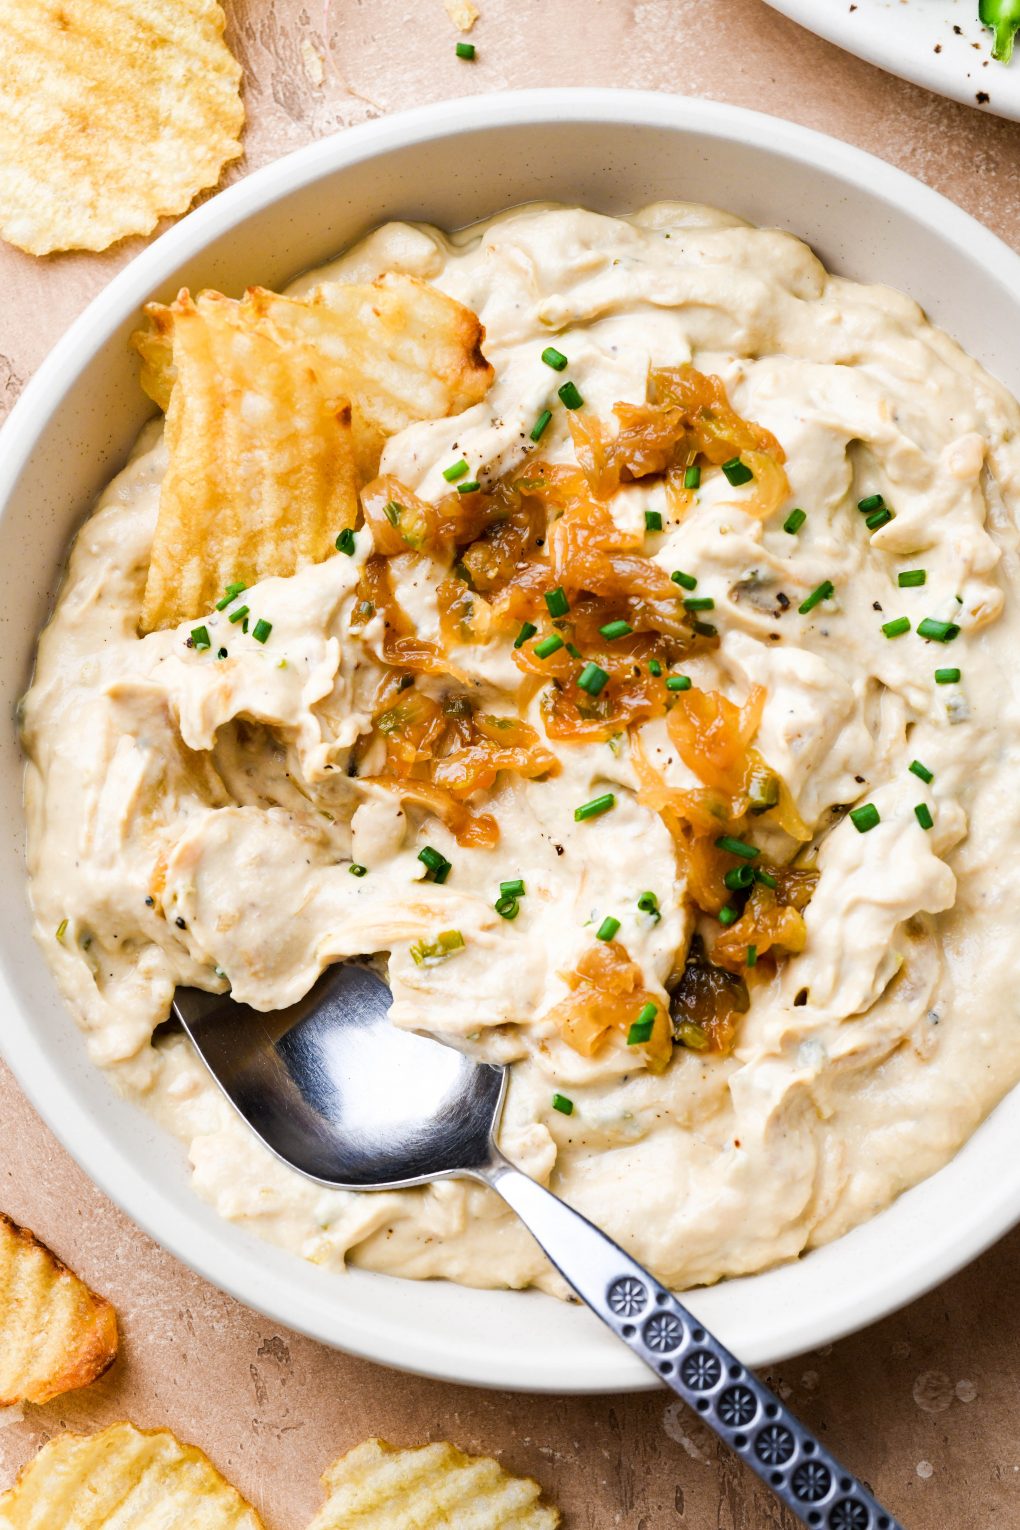 Close up overhead shot of a shallow cream colored bowl filled with super thick and creamy dairy free french onion dip. Dip is topped with caramelized onions and chives. On a light brown background surrounded by scattered ruffle potato chips. 